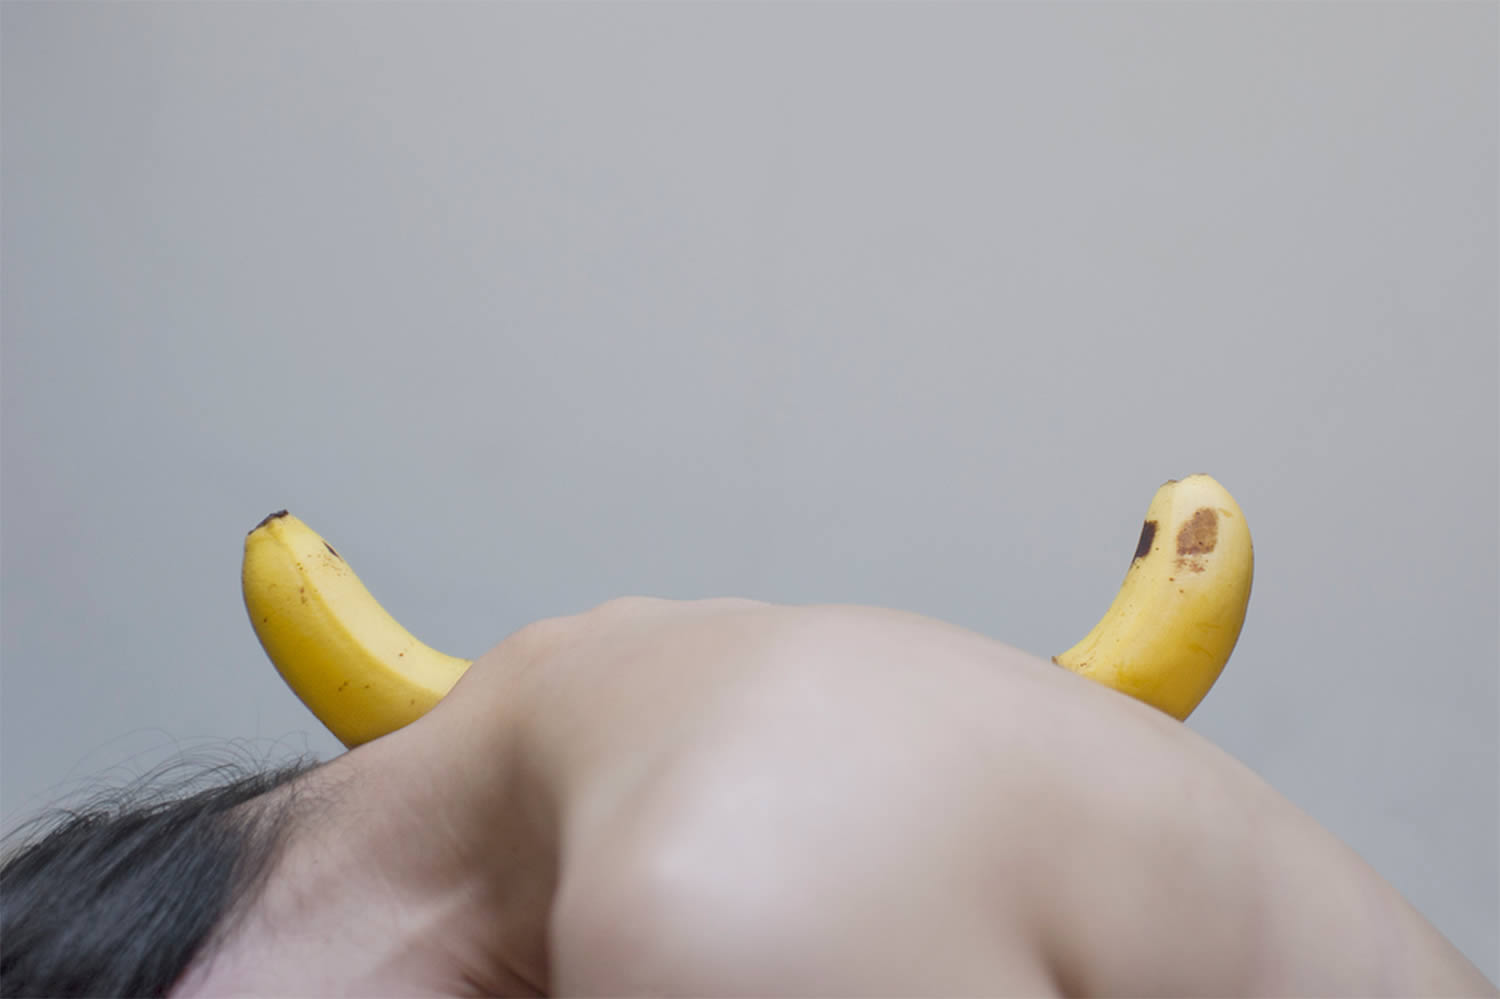 bananas on woman's back, photo by yung cheng lin